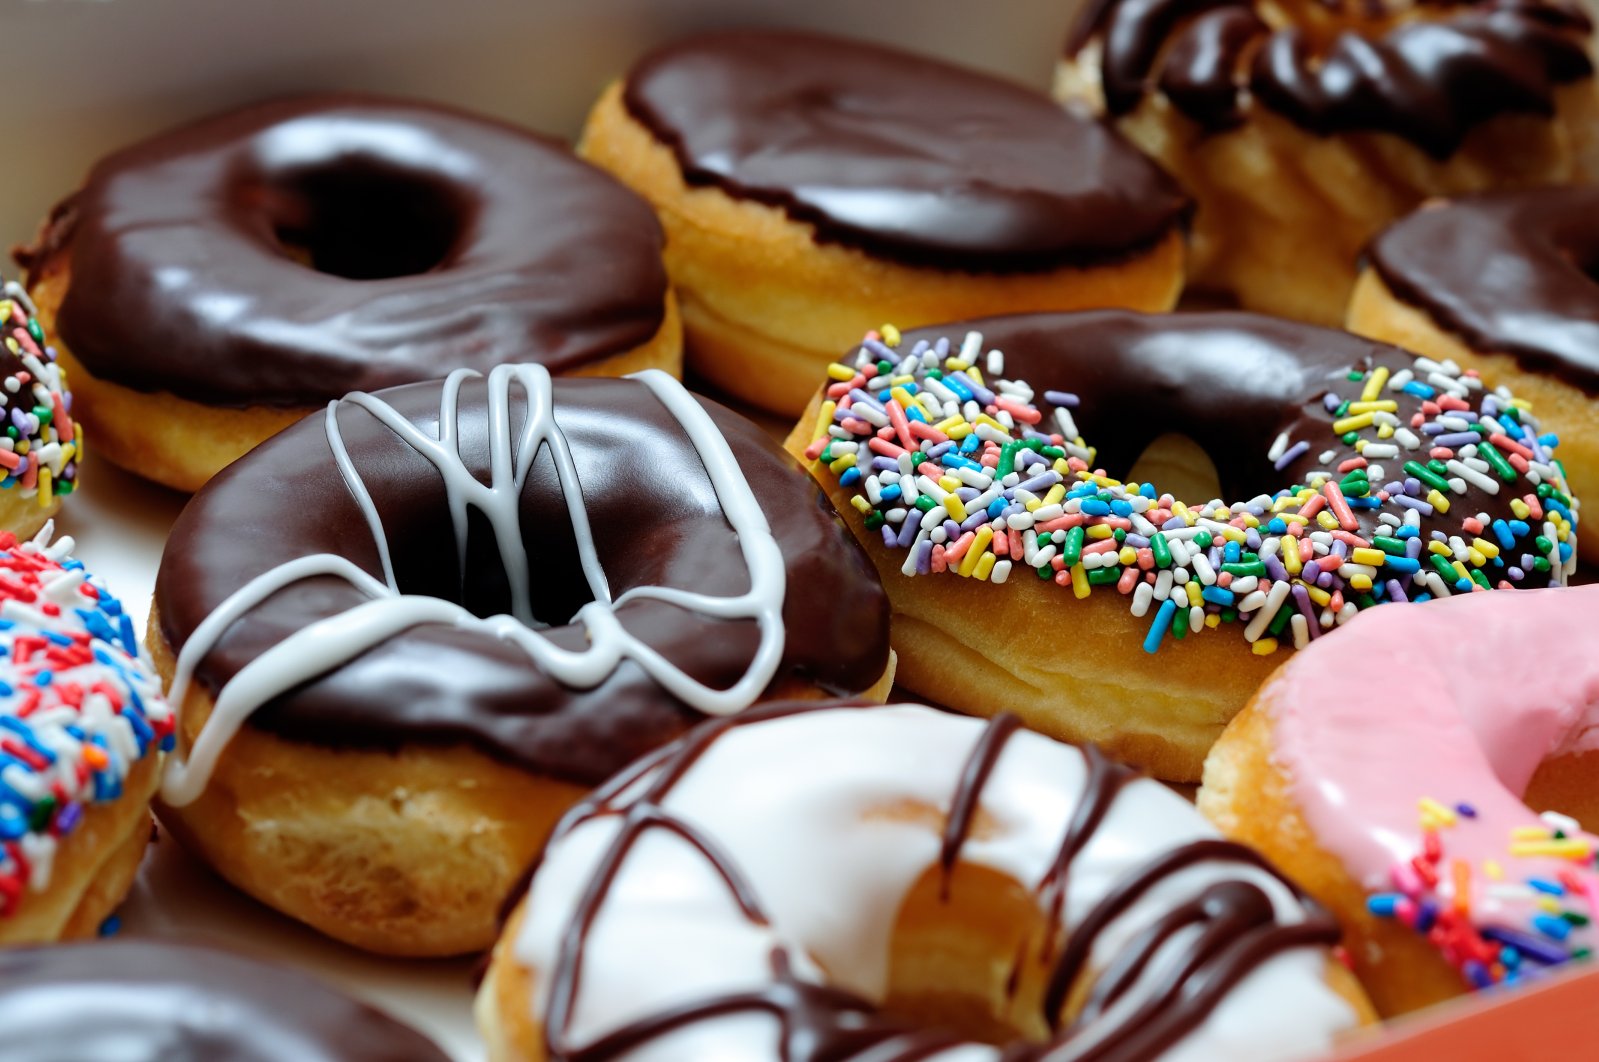 Assorted donuts in a box. (Shutterstock Photo)